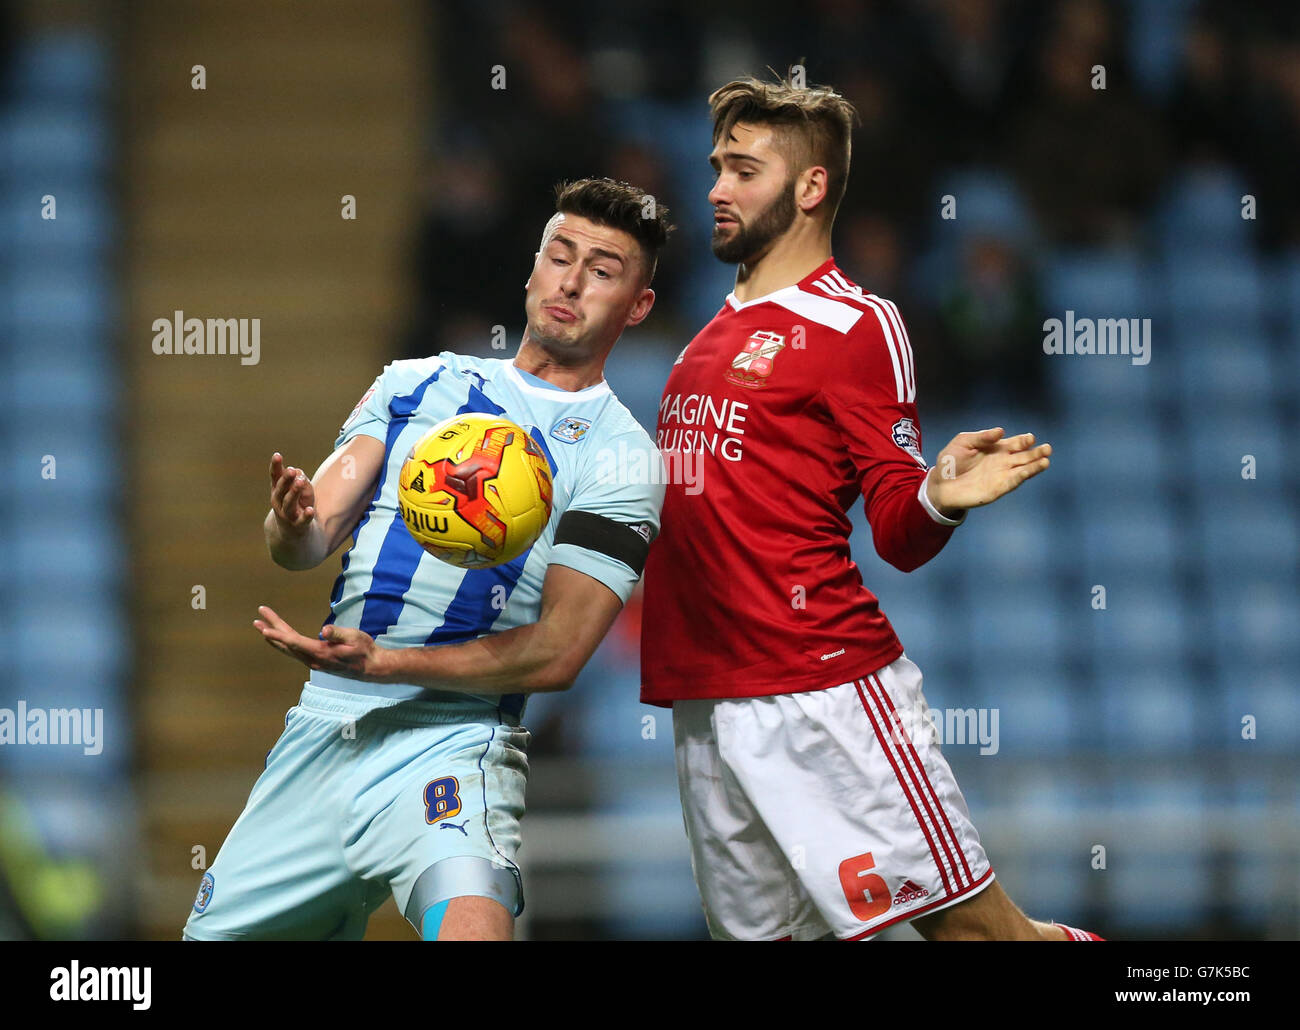 Soccer - Sky Bet League One - Coventry City v Swindon Town - Ricoh Arena Stock Photo